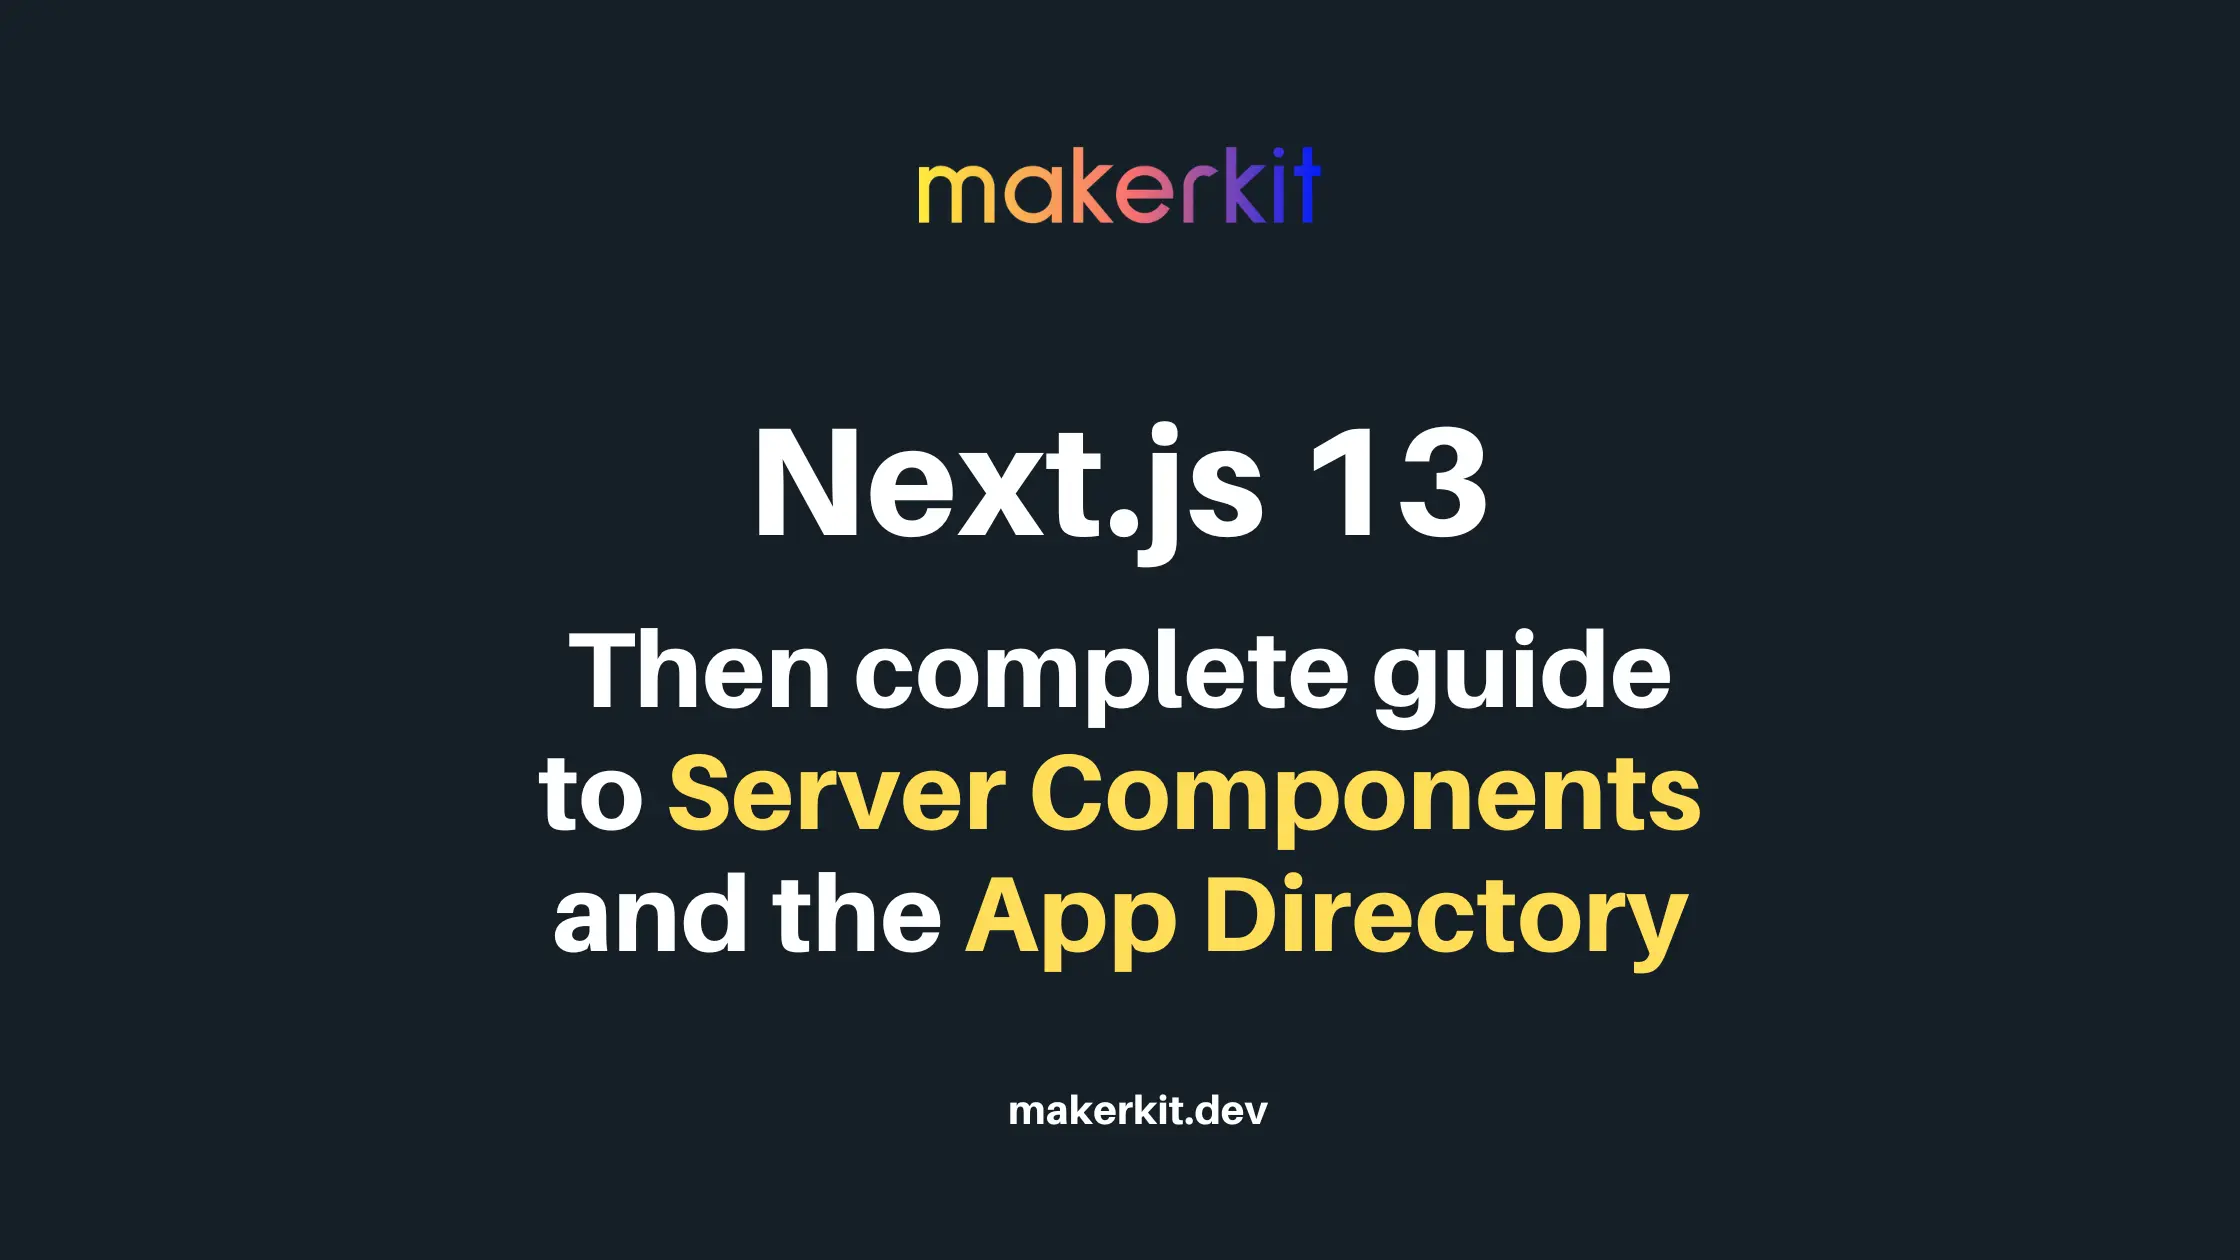 Cover Image for Next.js 13: complete guide to Server Components and the App Directory